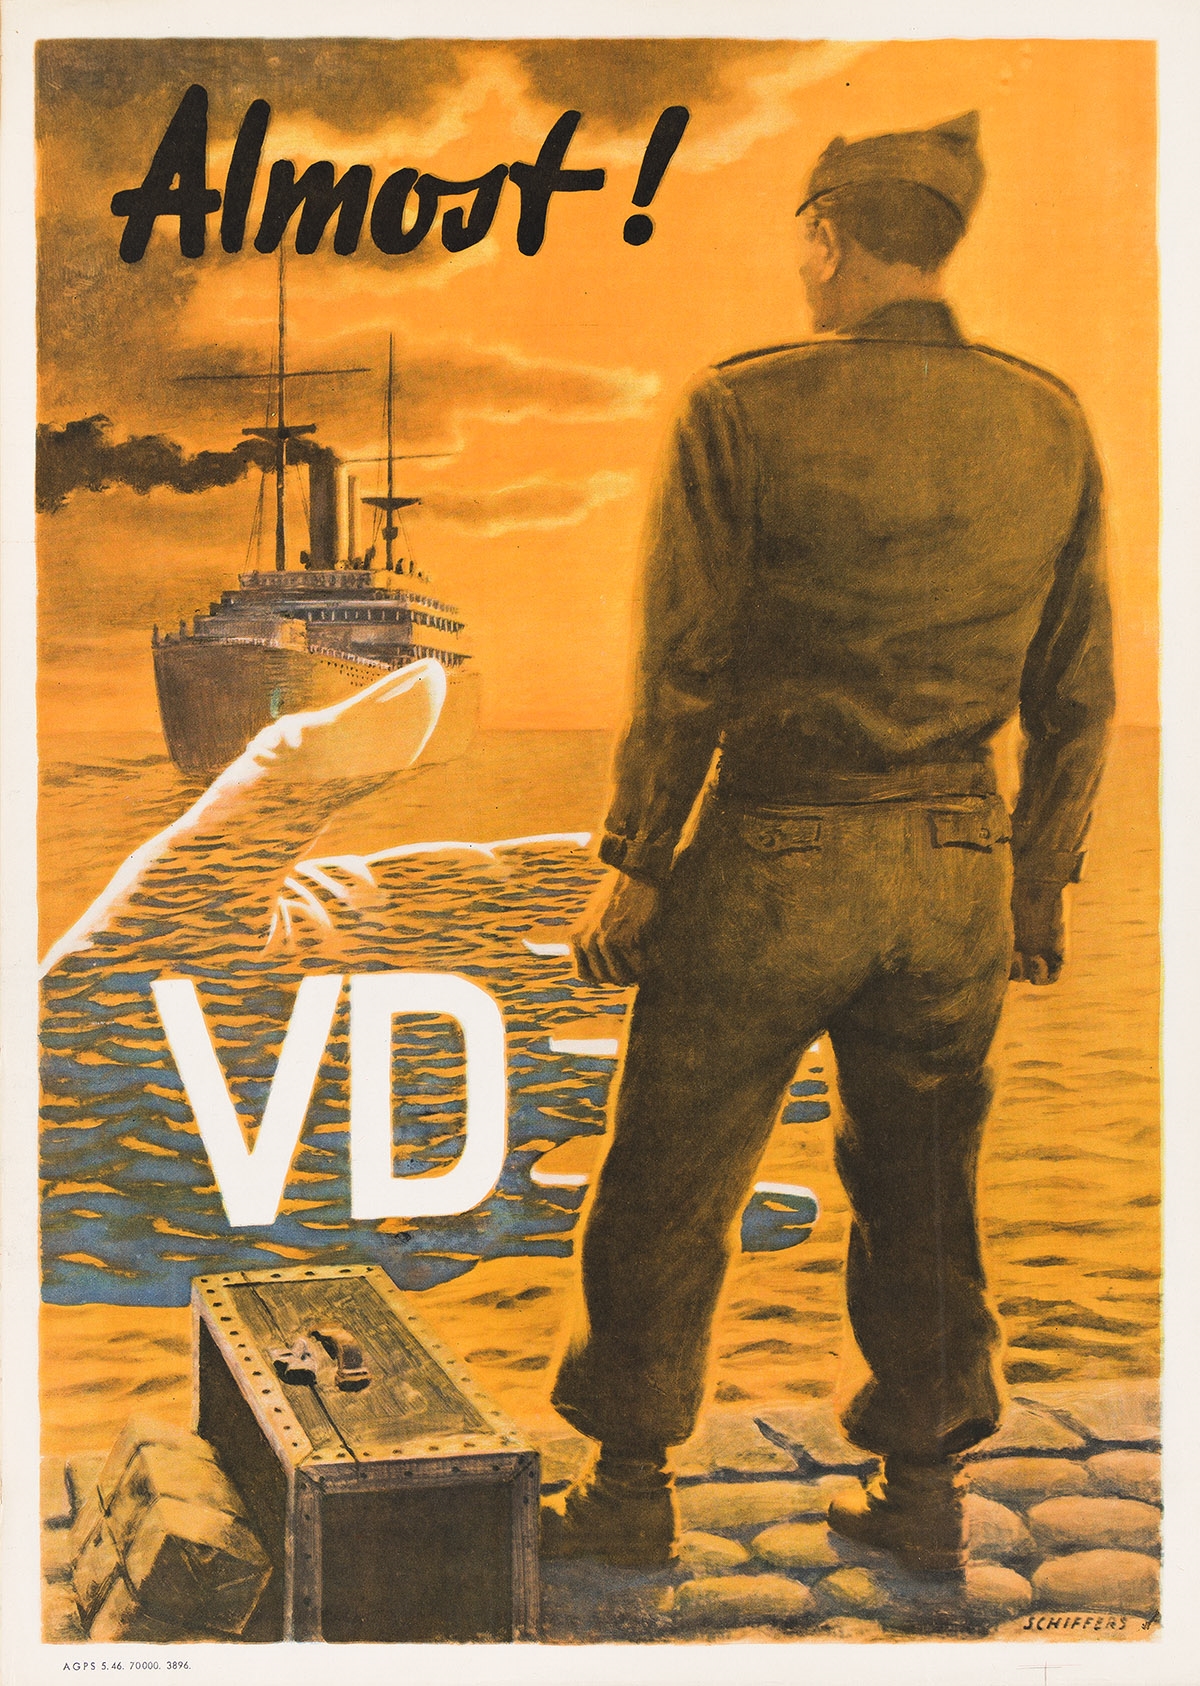 DELAYED! / VD] & [ALMOST! / VD]. Two posters. Circa 1940s - Franz Oswald Schiffers